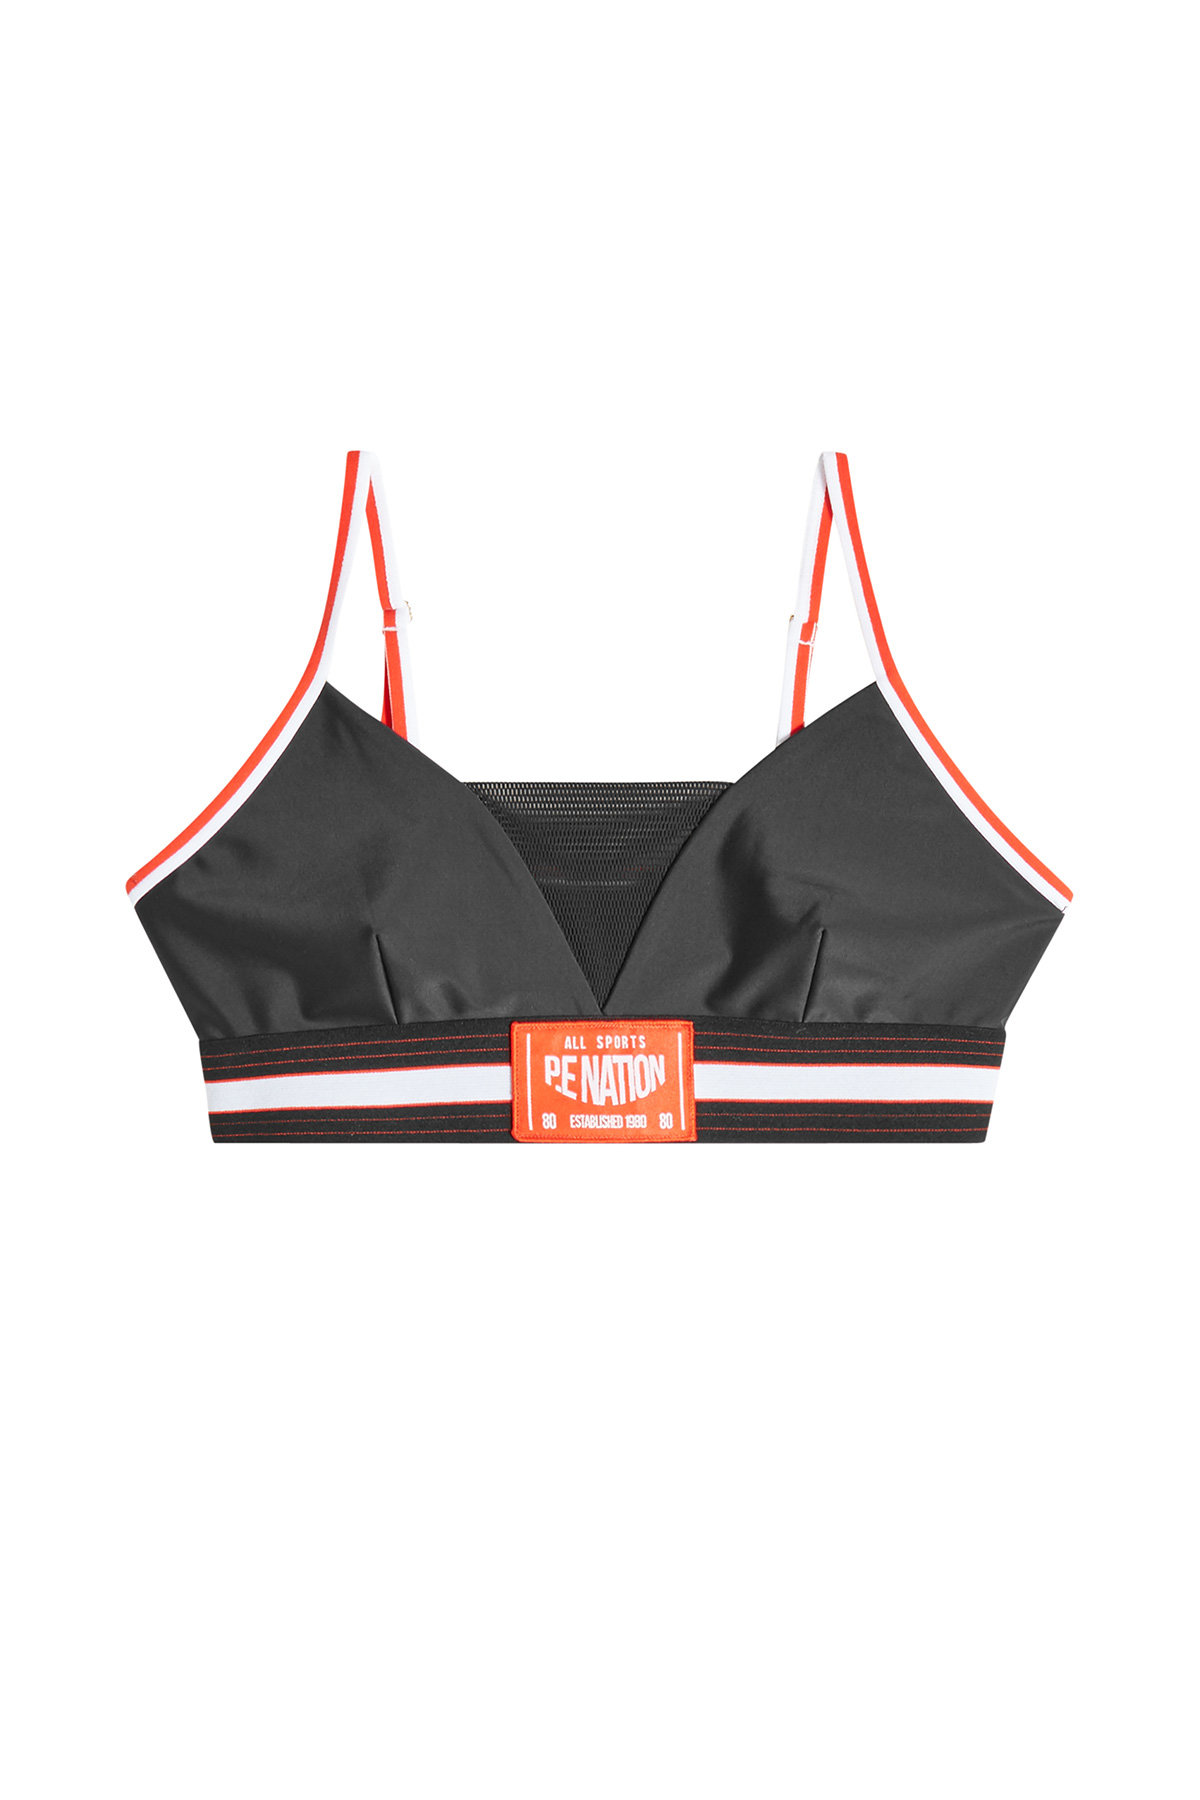 P.E. Nation - Left Hook Cropped Top Sports Bra